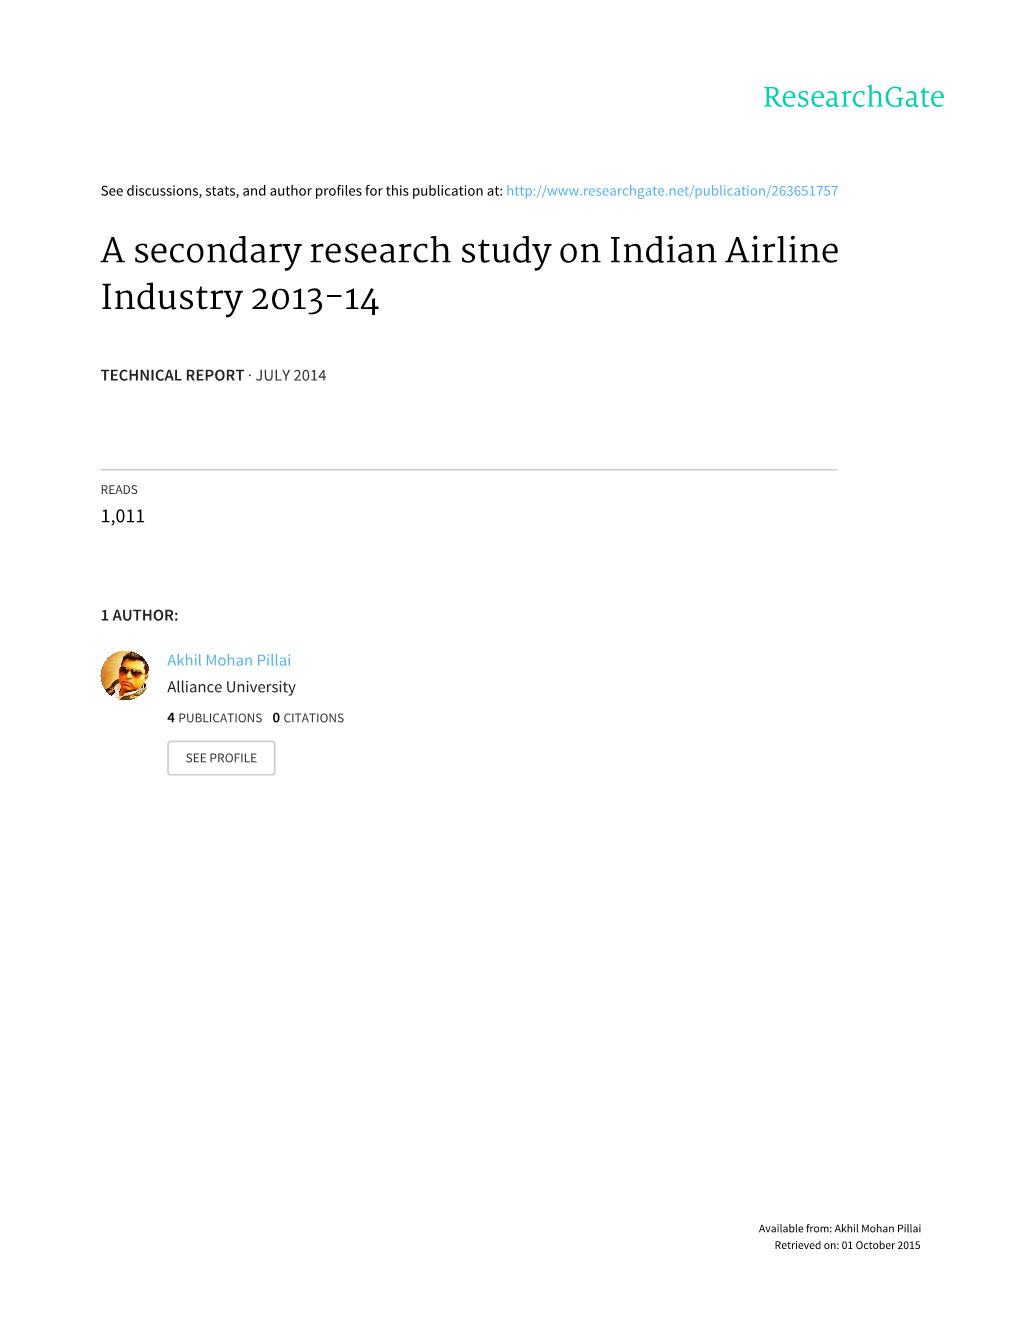 A Secondary Research Study on Indian Airline Industry 2013-14